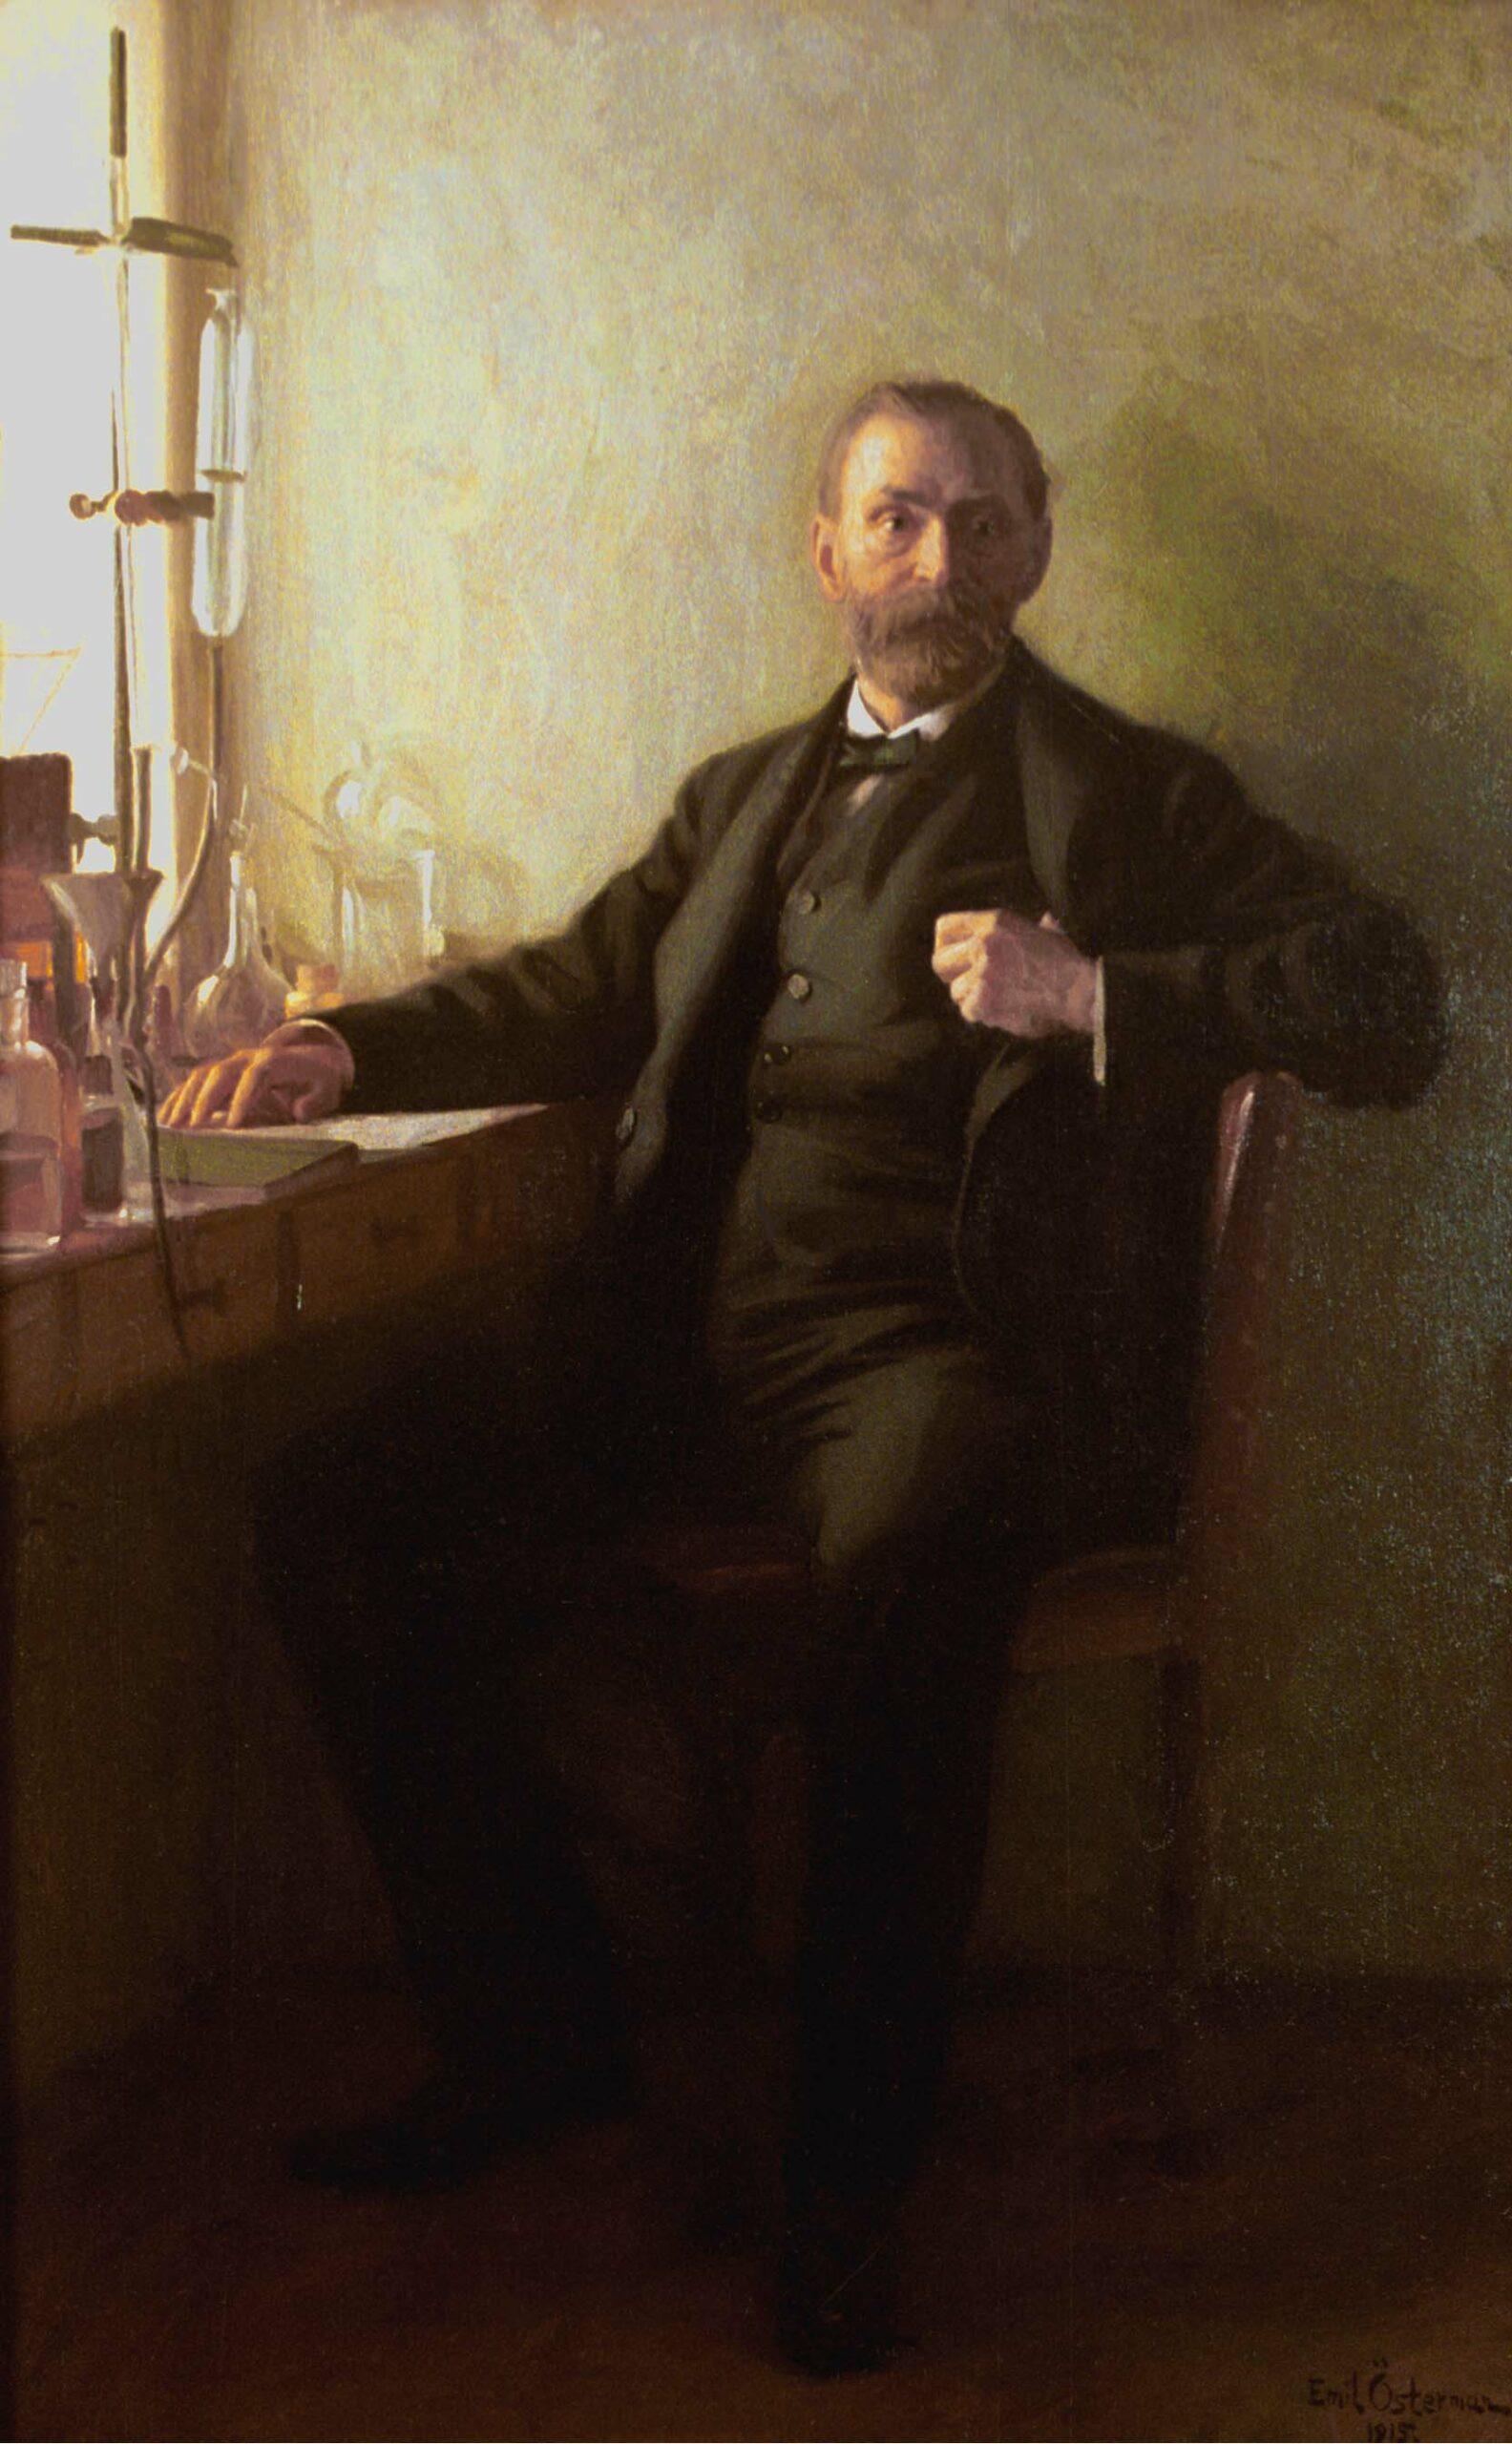 A painting of inventor Alfred Nobel by a window.